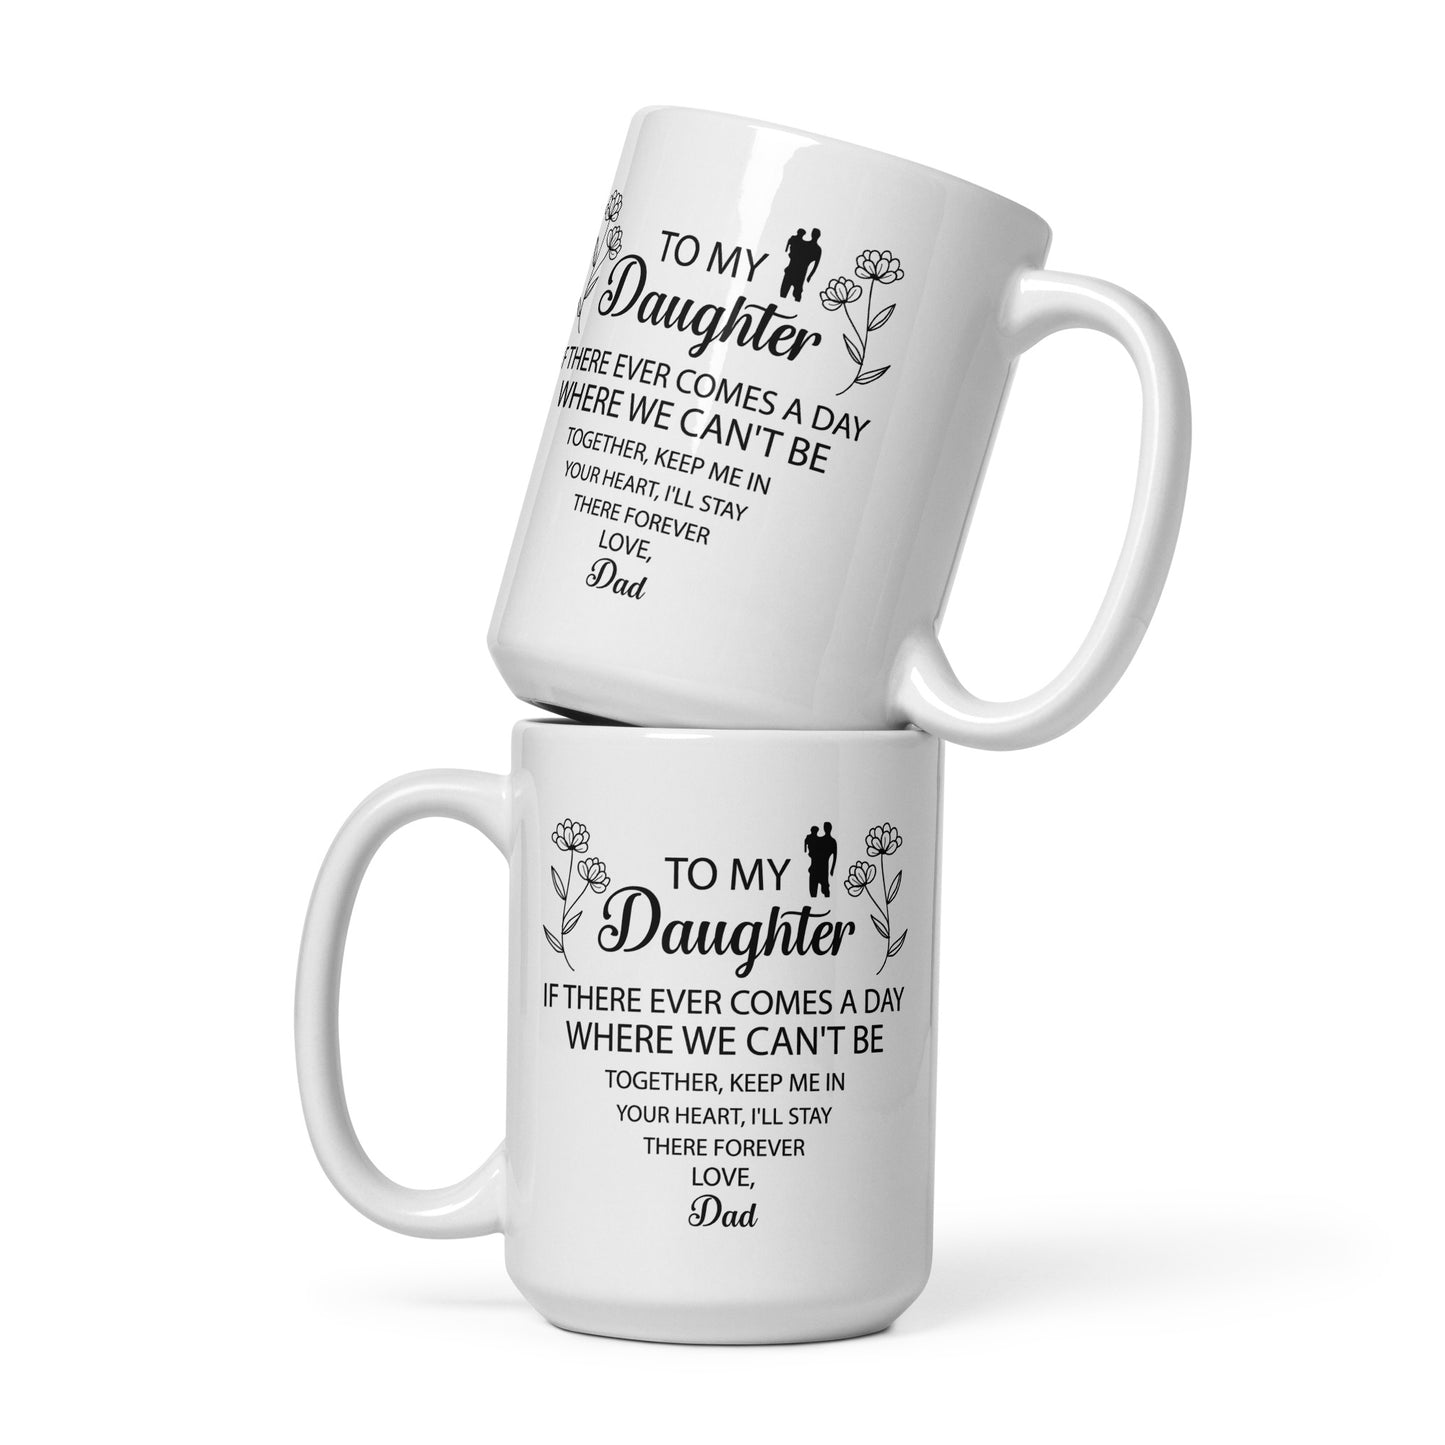 To my daughter comes a day Personalized Mug Gift Customized Mug Gift w Heartfelt Message